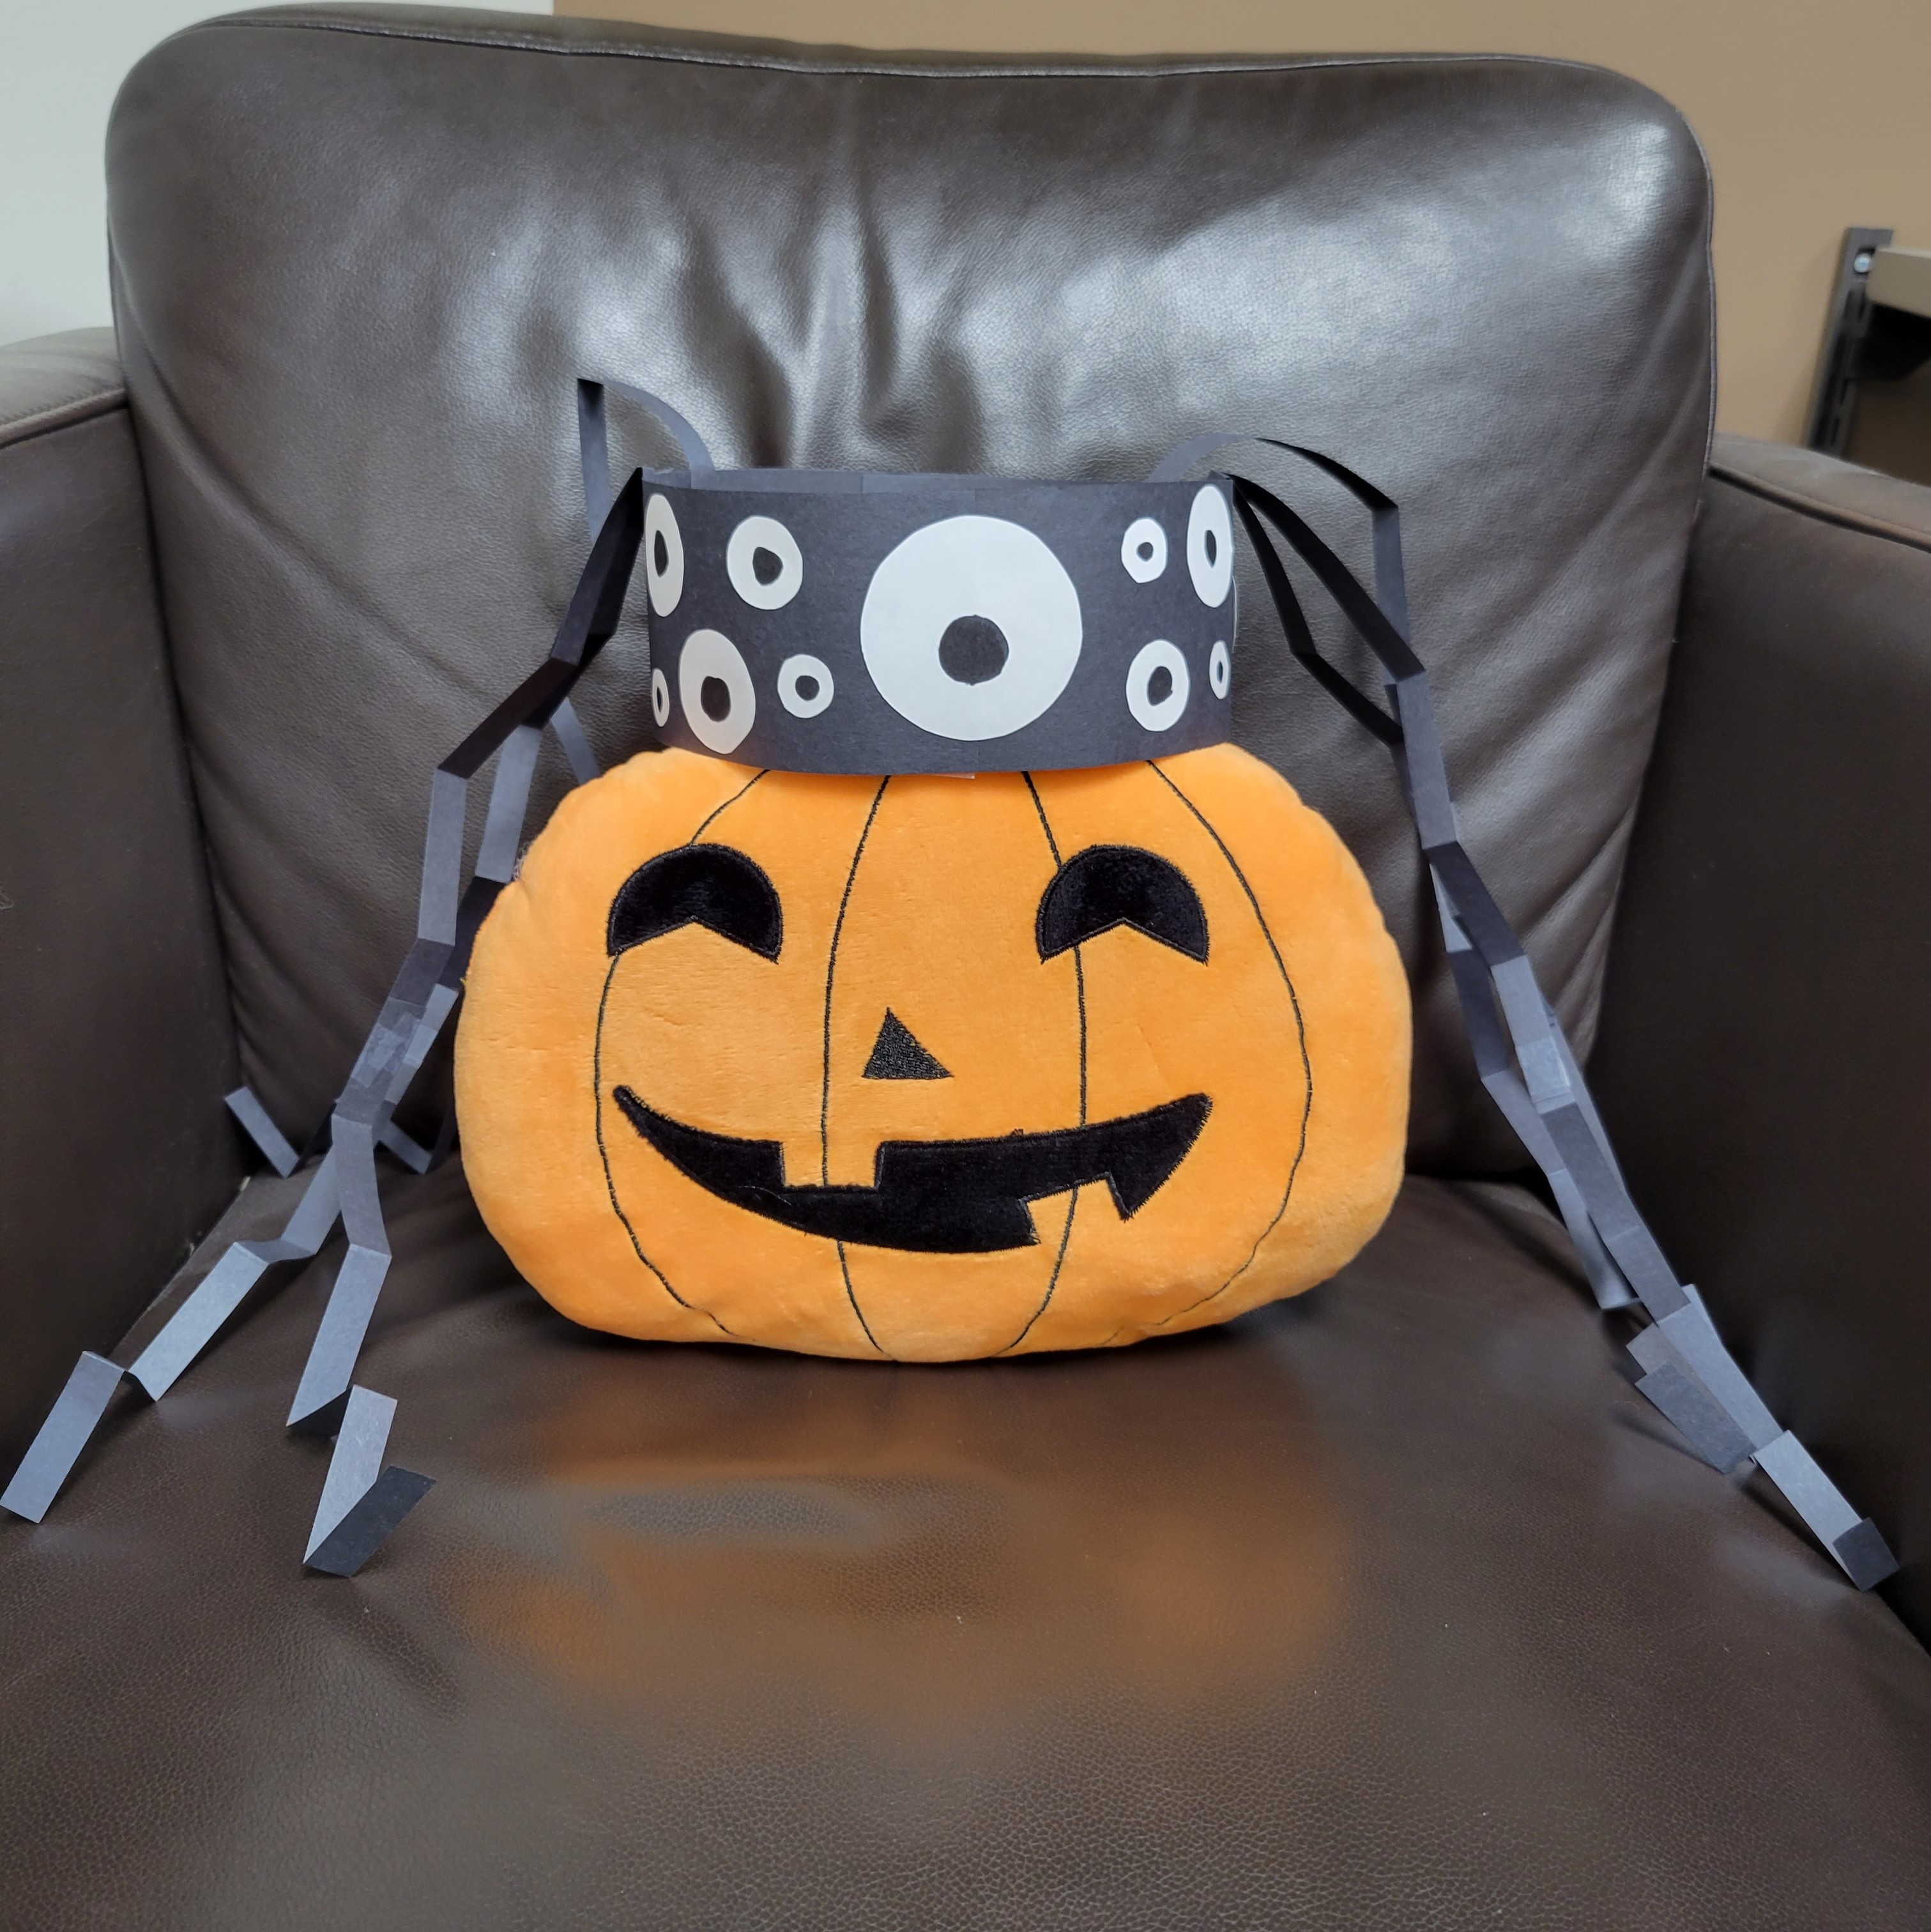 paper spider headband sitting on top of plush jack-o-lantern sitting in a leather chair